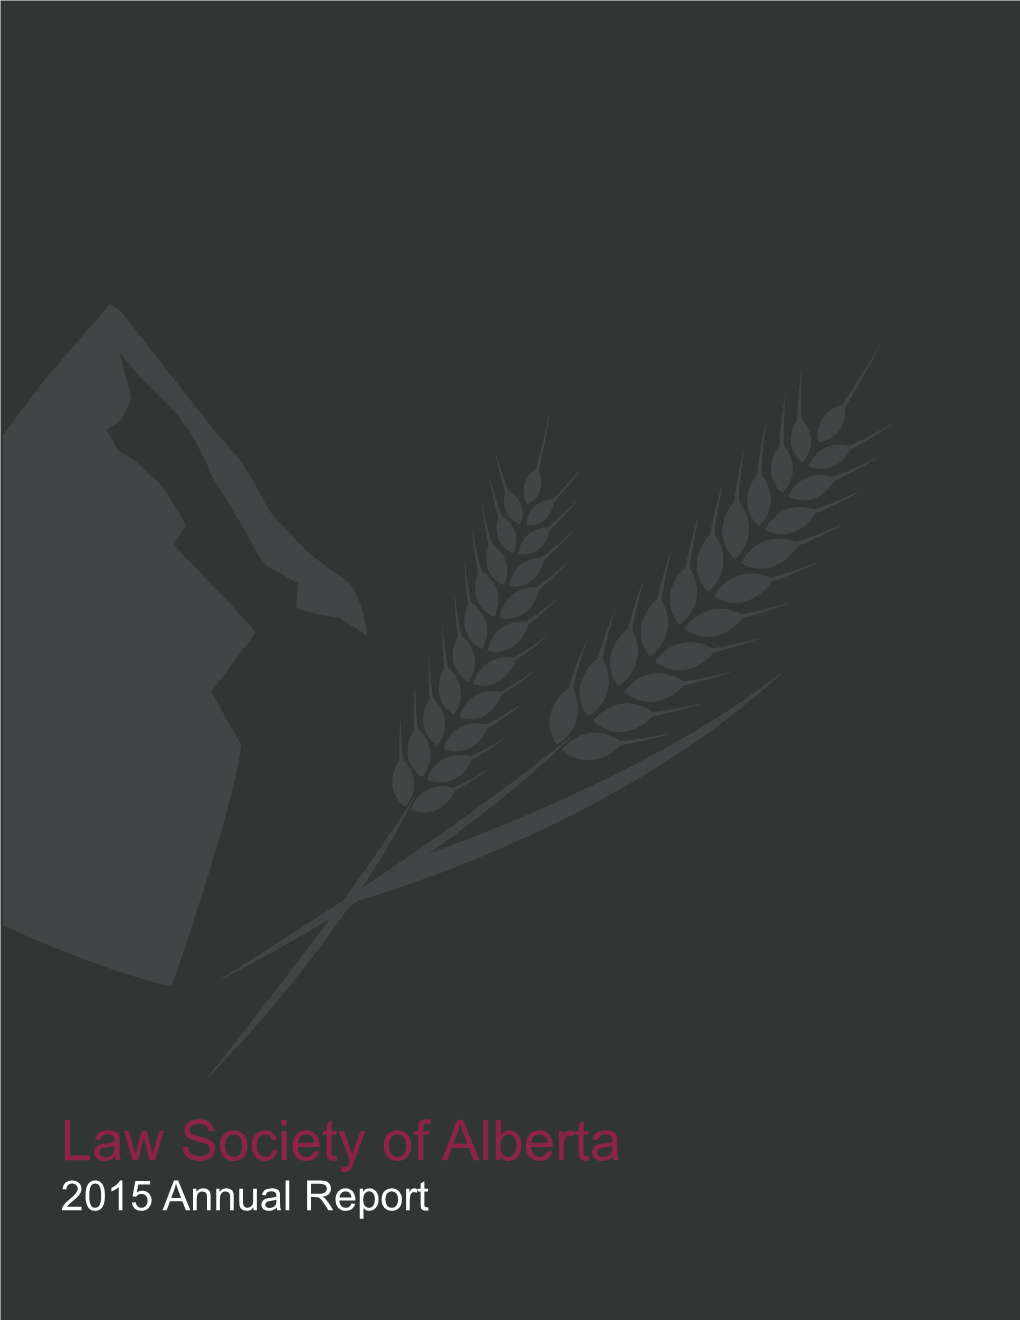 Annual Report of ALBERTA About the Law Society